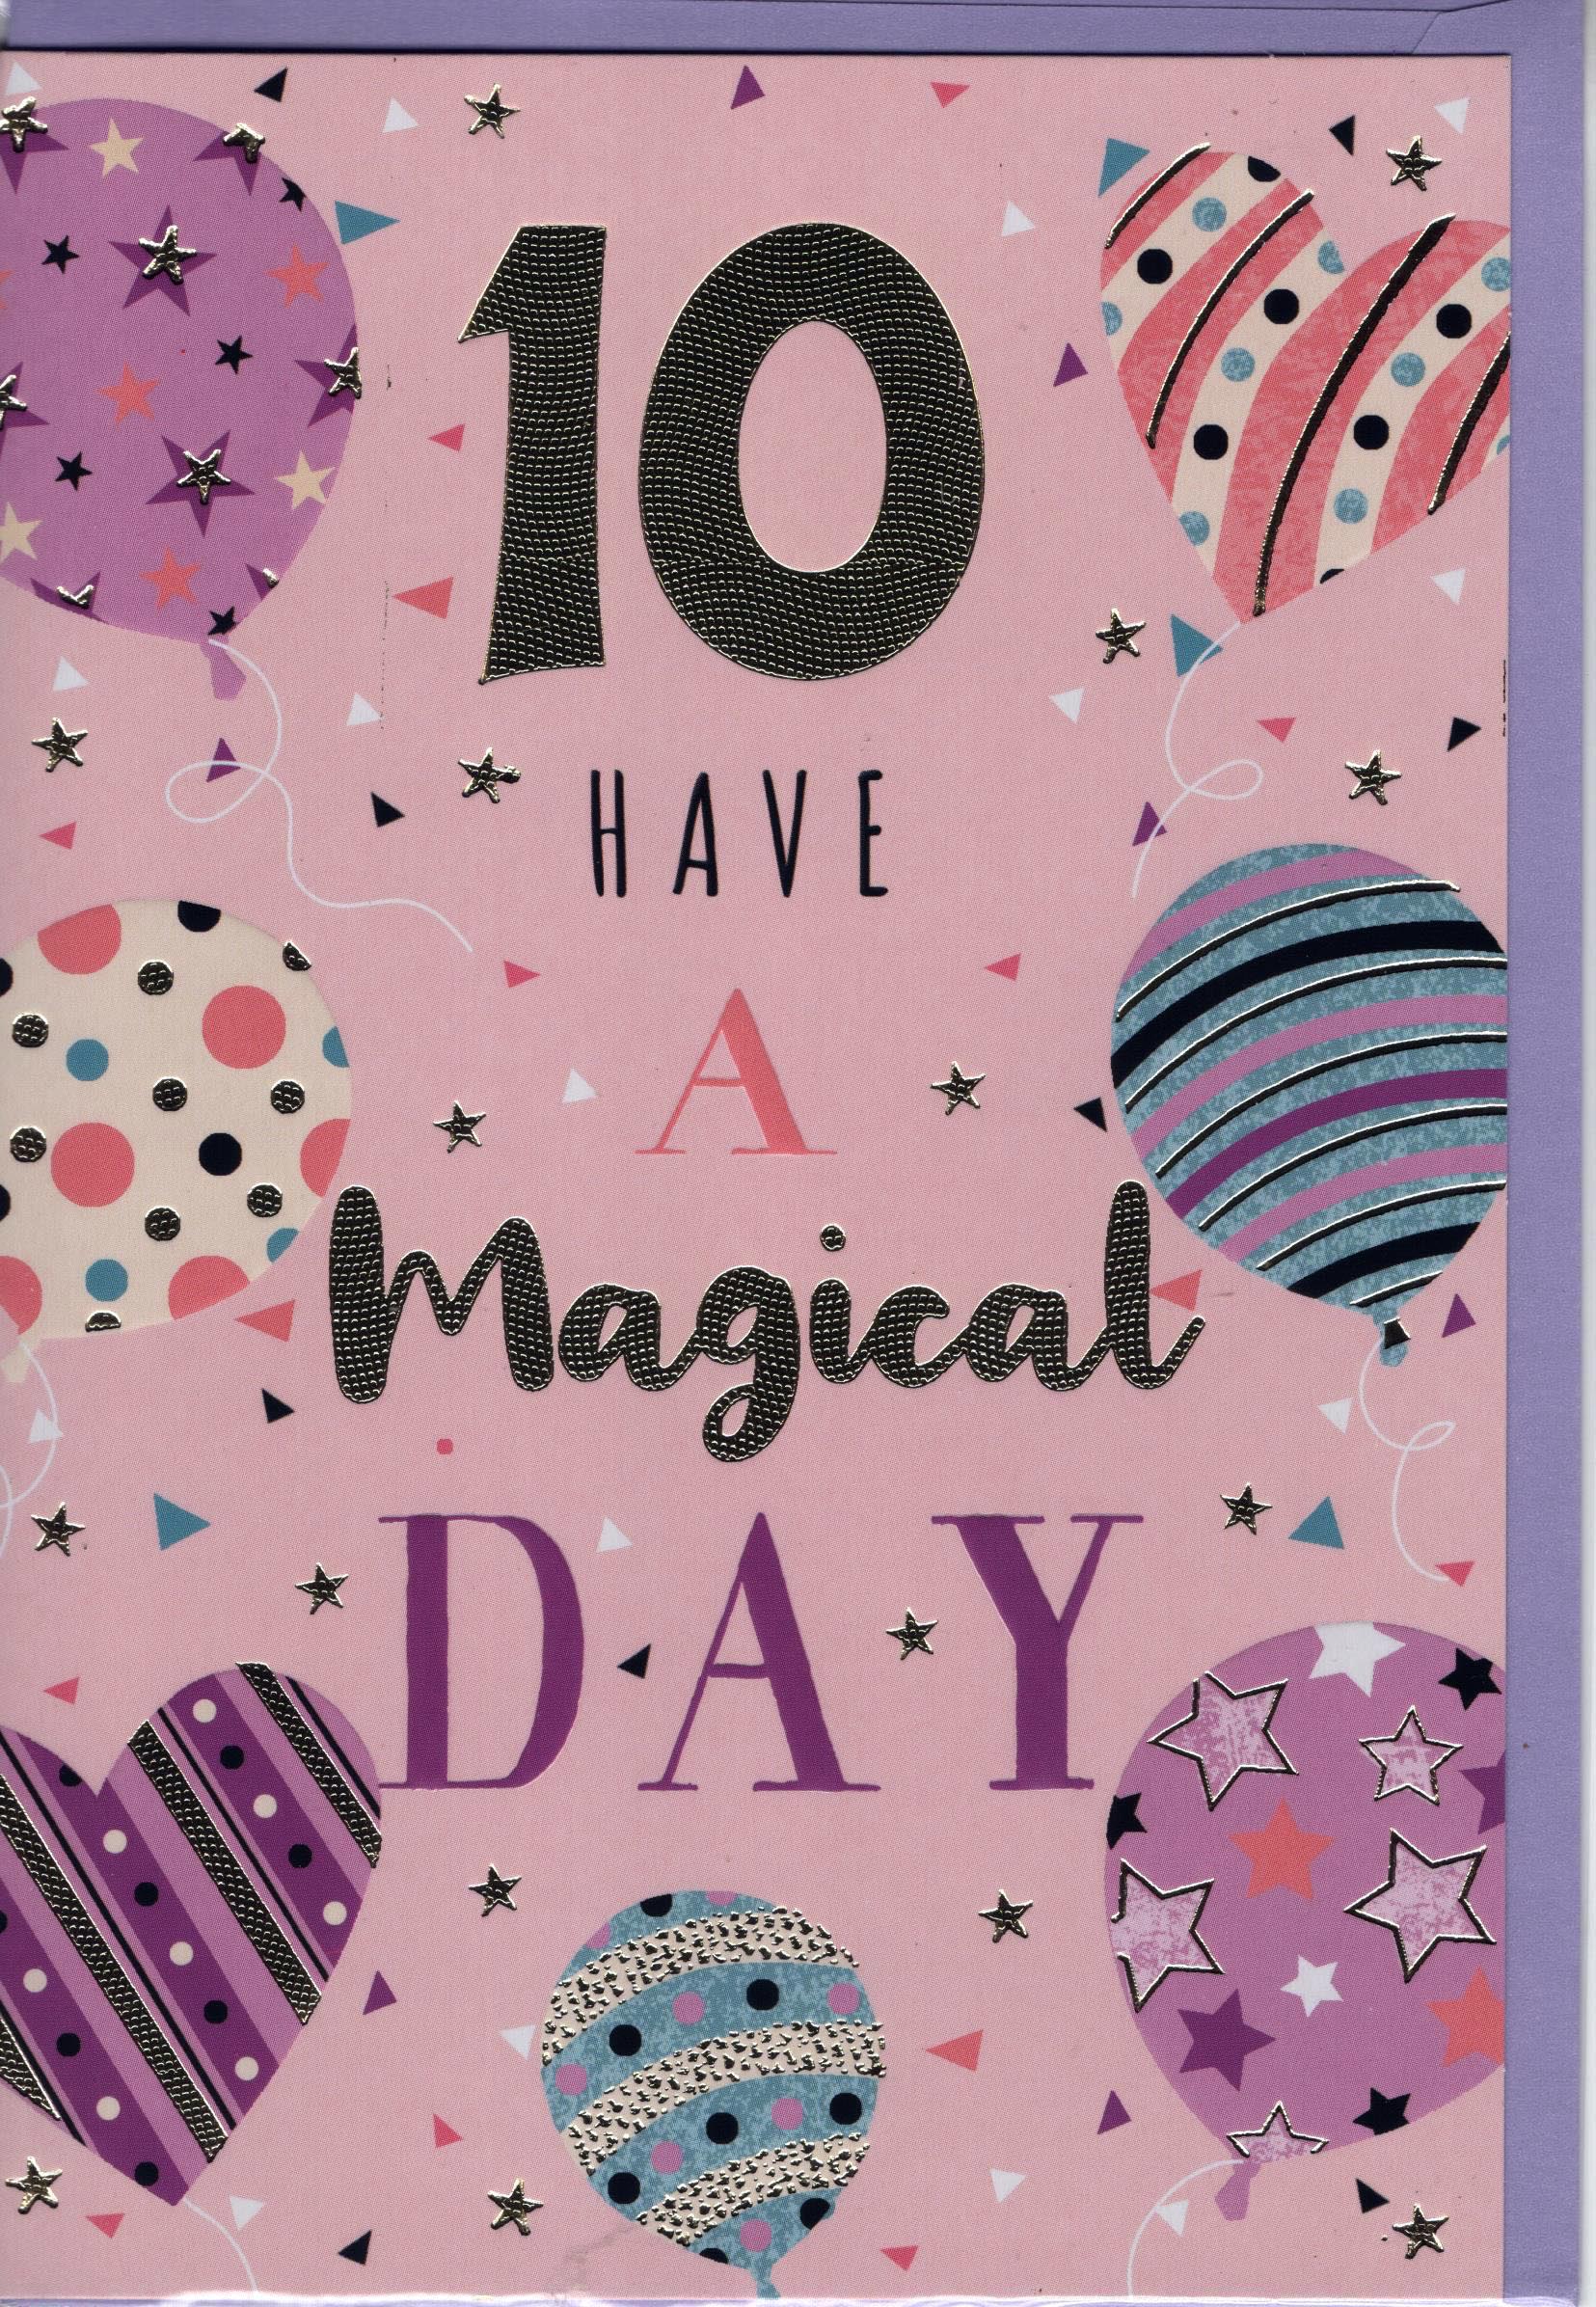 10 Have a Magical Day